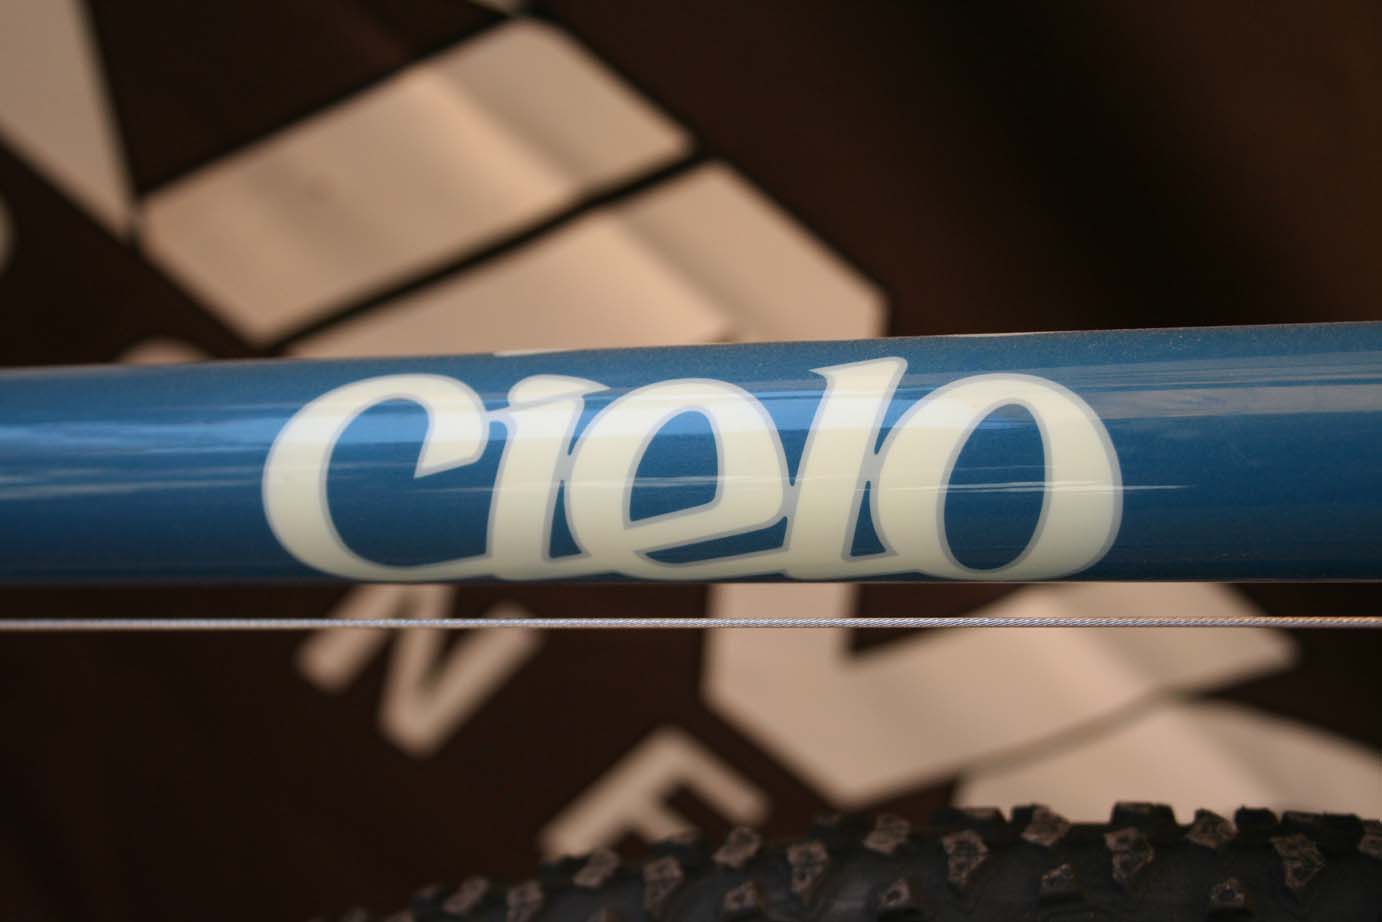 Chris King\'s Cielo brand enters the cyclocross market with hand-made steel frames at $1800.